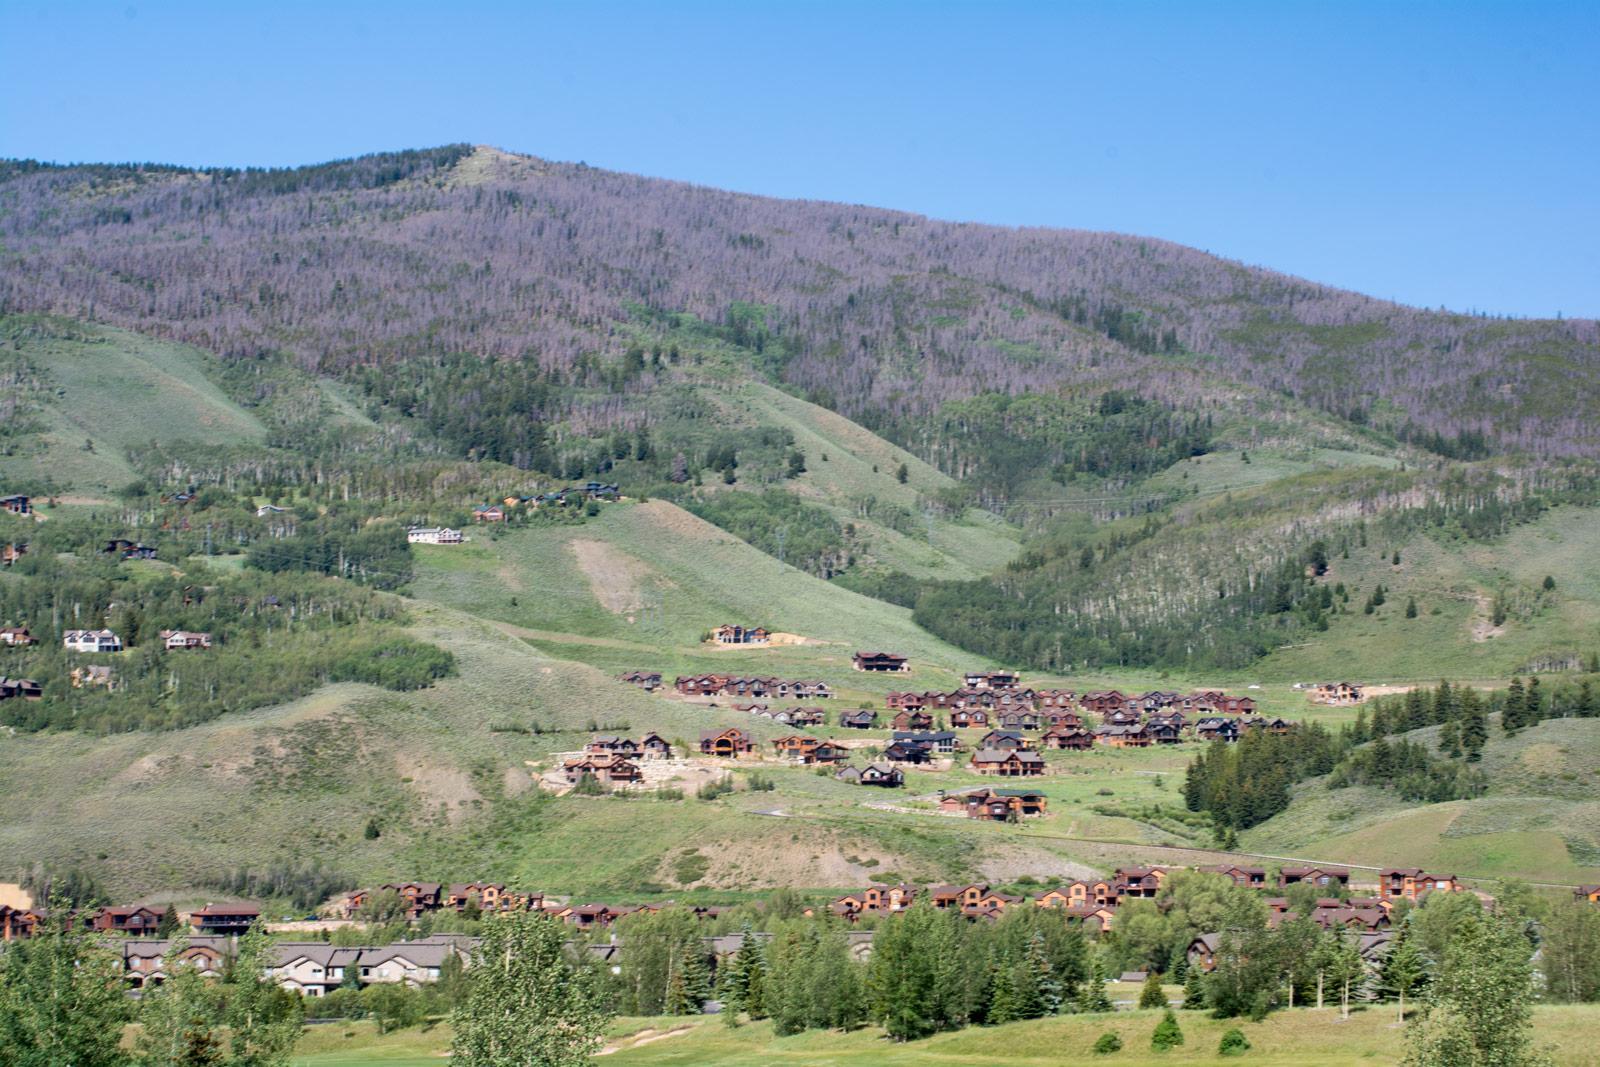 Angler Mountain Ranch sits on the east side of the upper Blue River Valley at the base of Ptarmigan Mountain